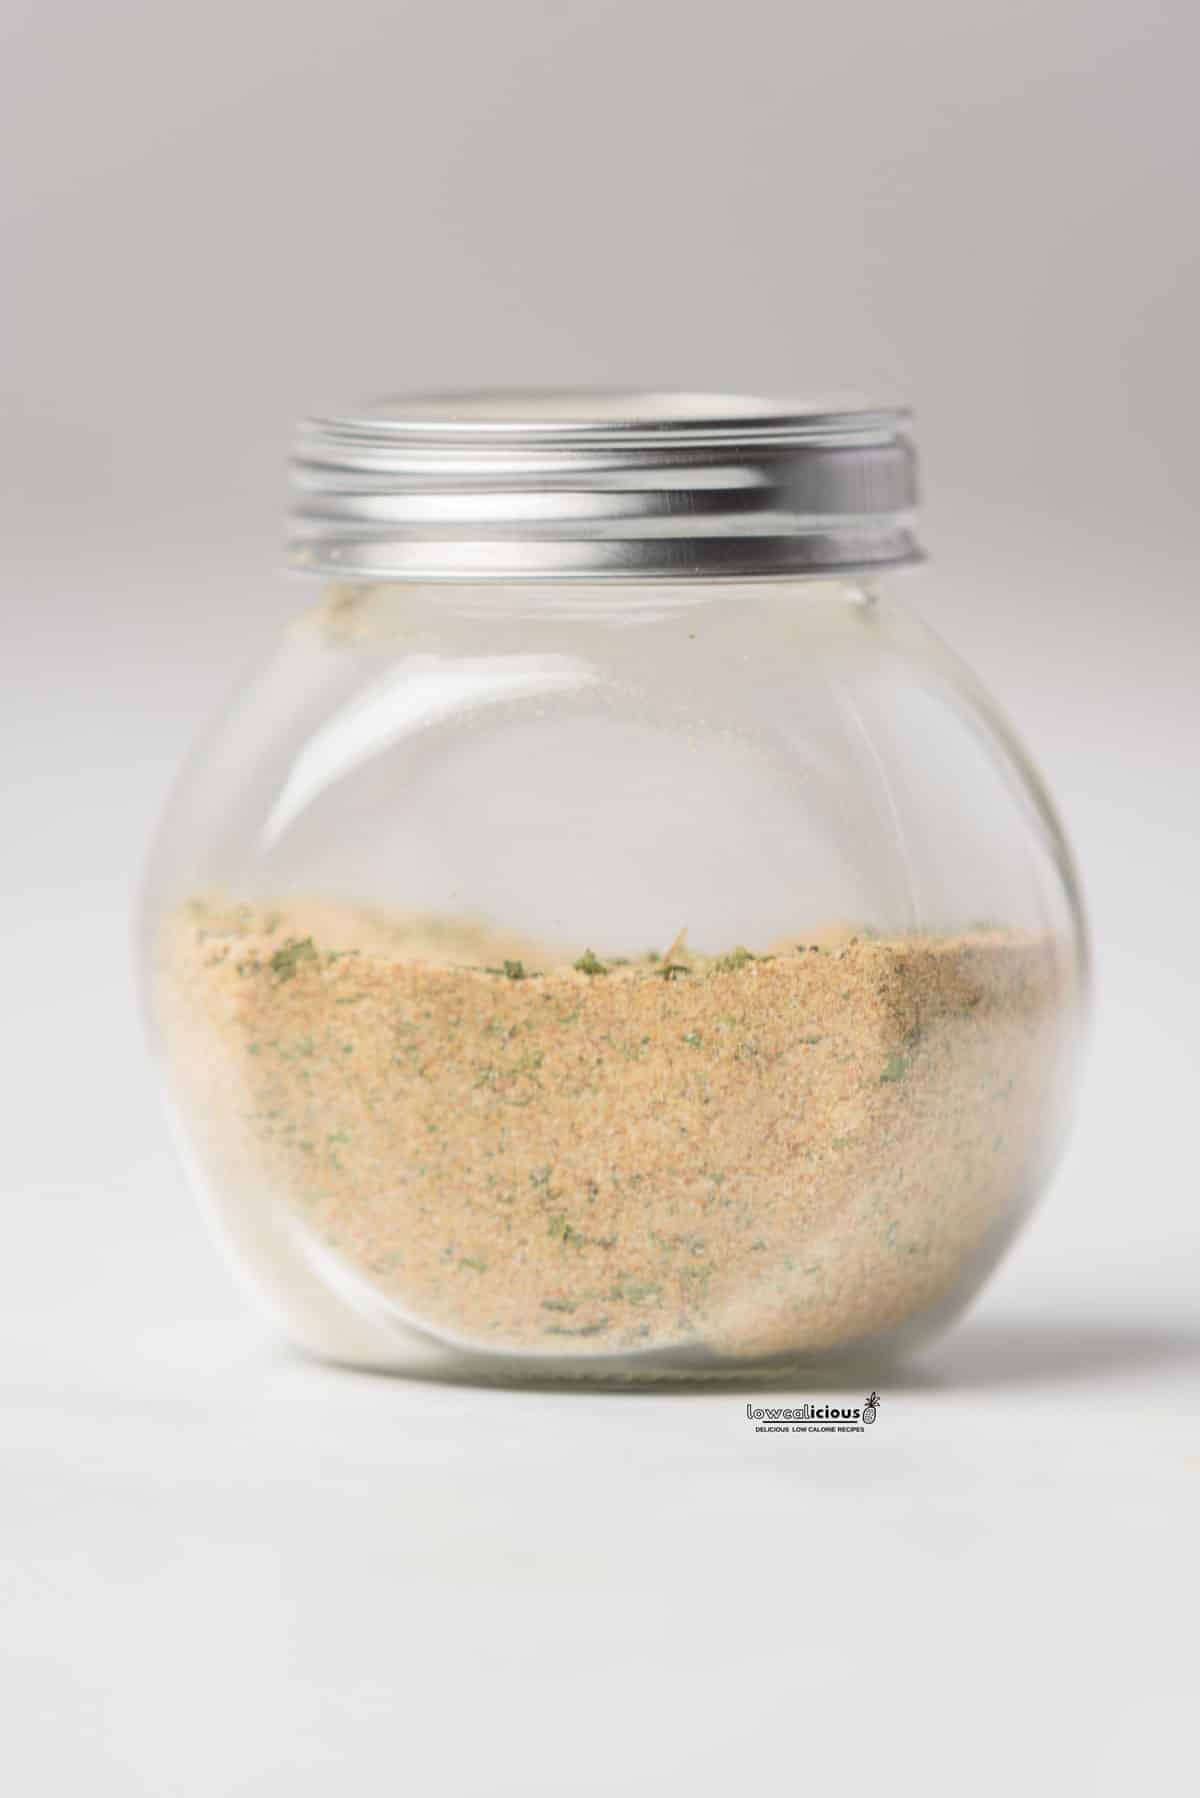 a homemade chicken seasoning recipe (chicken rub) stored in a clear glass jar with a silver screw-on top